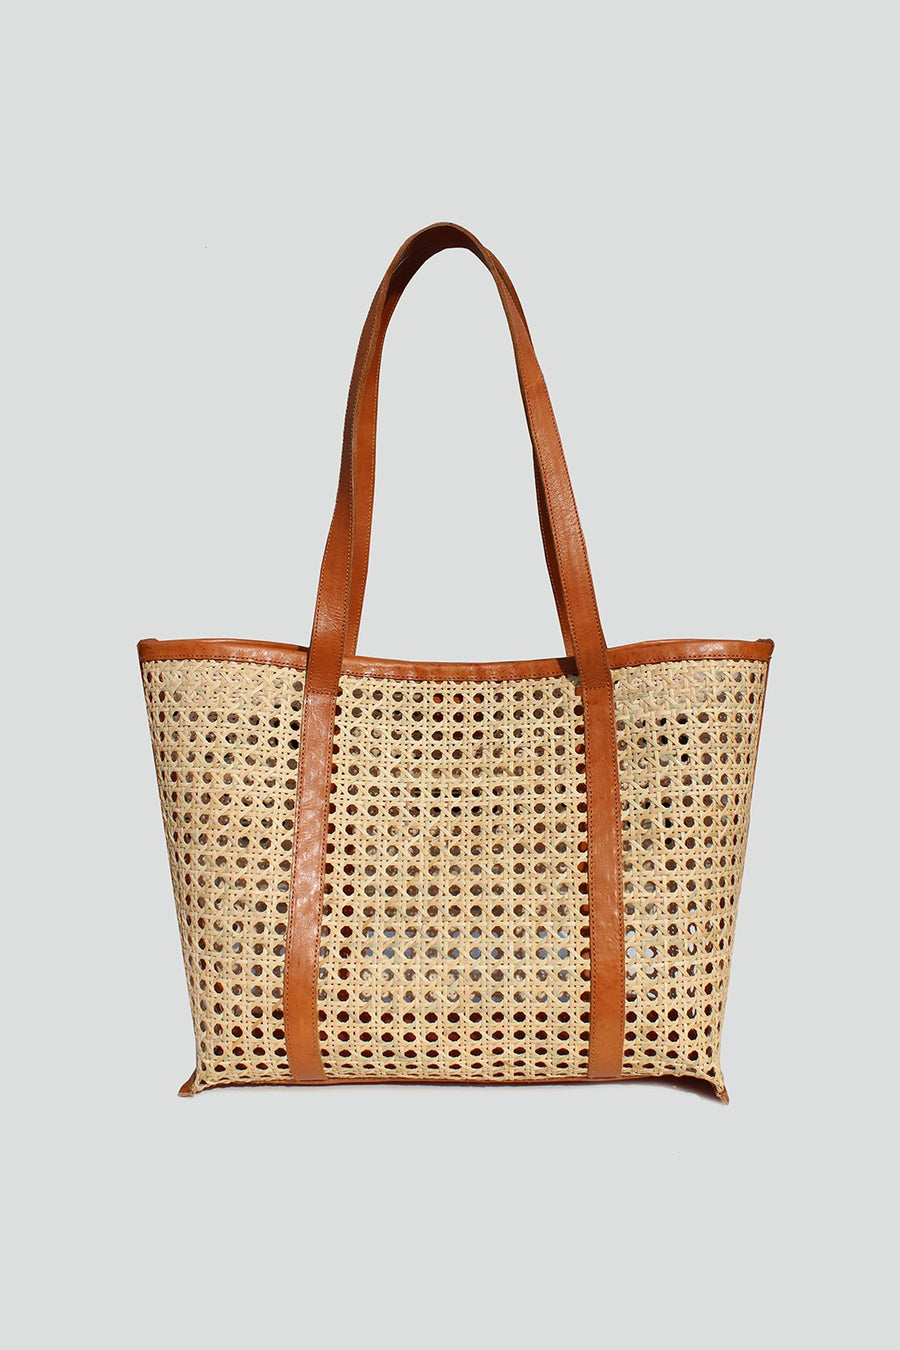 Featuring a large rattan detailed shoulder bag with a magnetic snap closure in the color tan